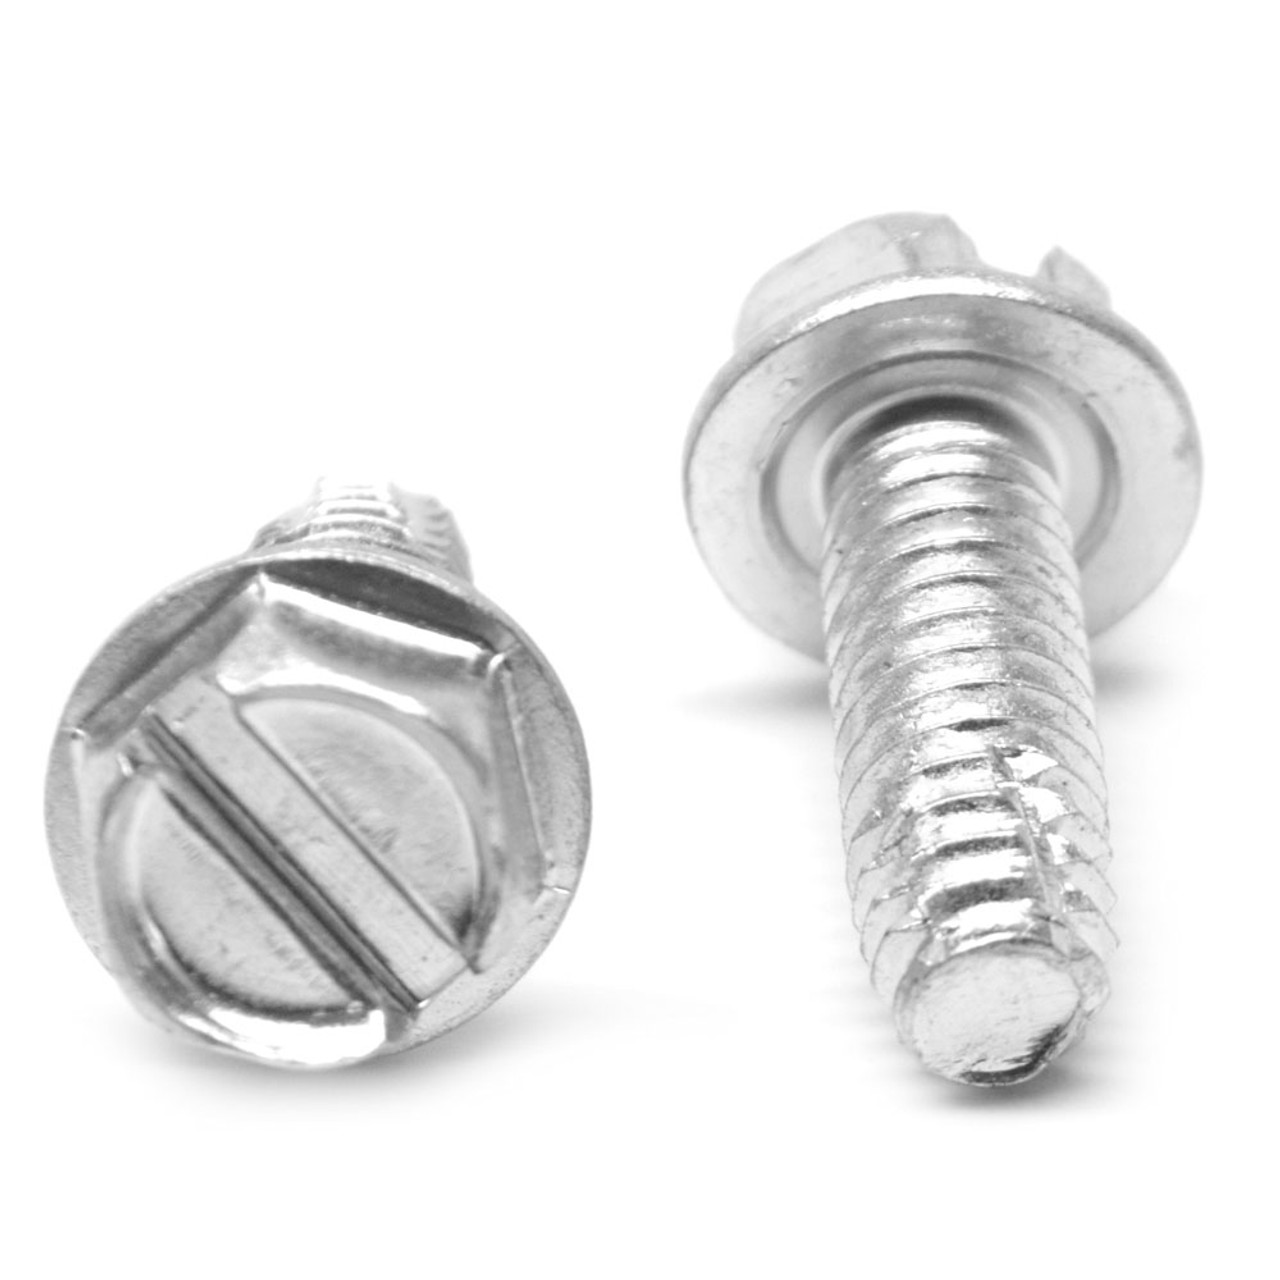 1/4-20 x 2 Coarse Thread Thread Cutting Screw Slotted Hex Washer Head Type F Stainless Steel 18-8